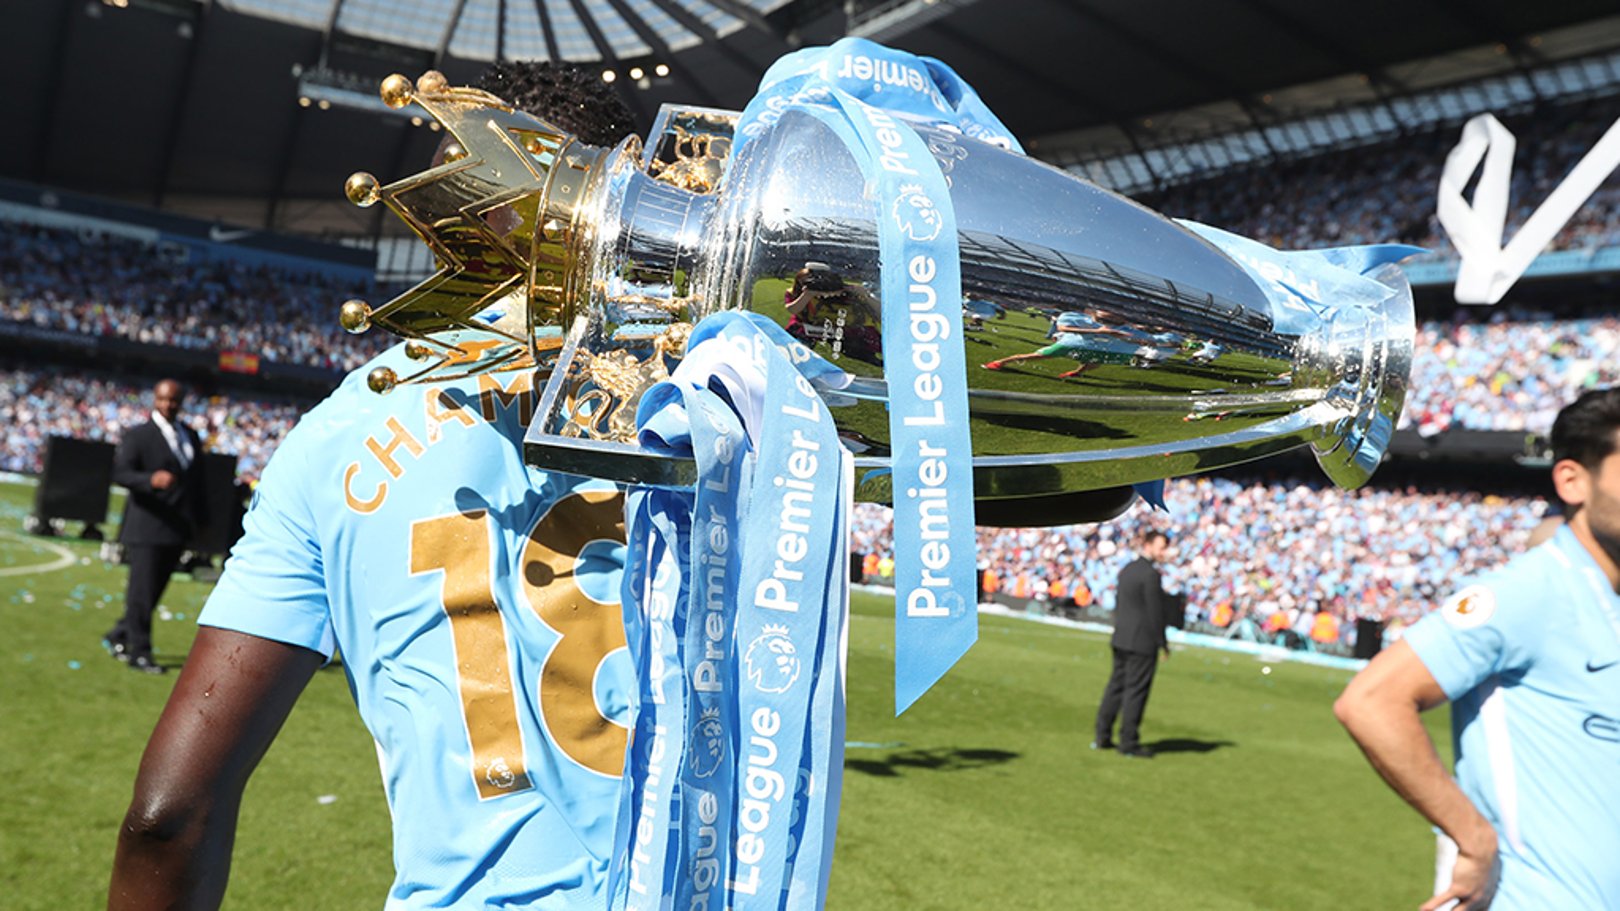 CHAMPIONS 18: What a nice looking trophy